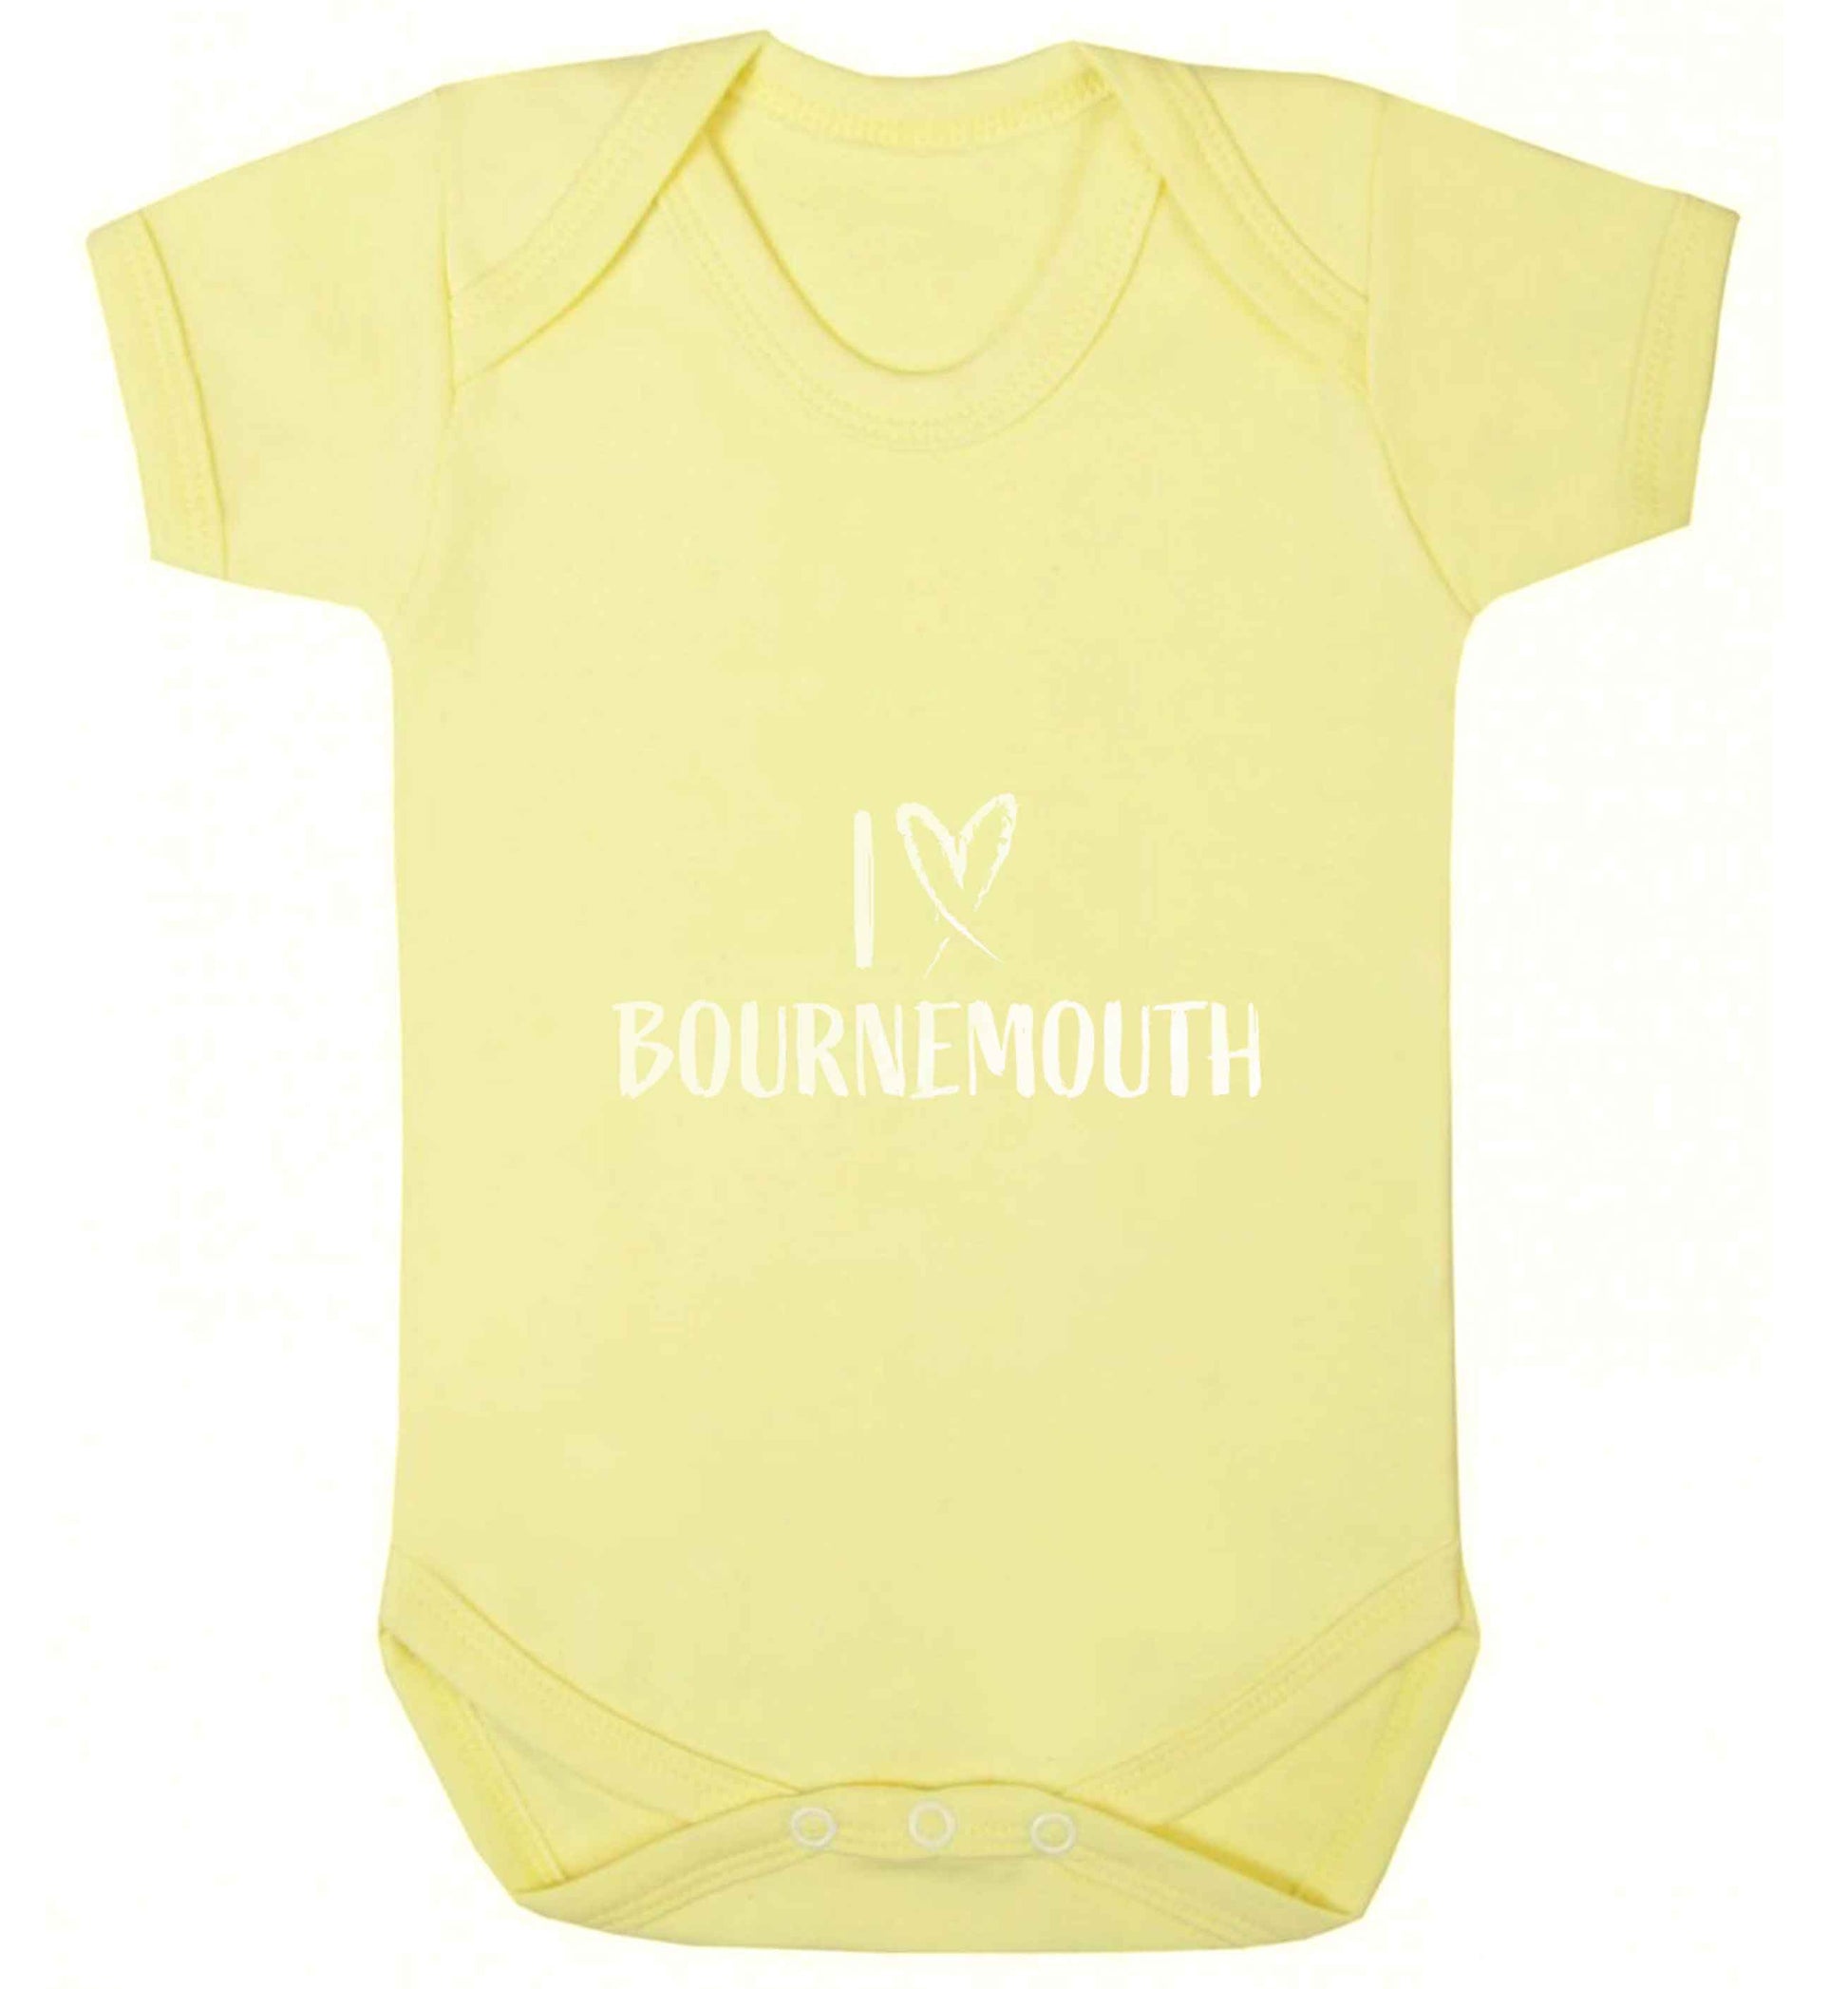 I love Bournemouth baby vest pale yellow 18-24 months